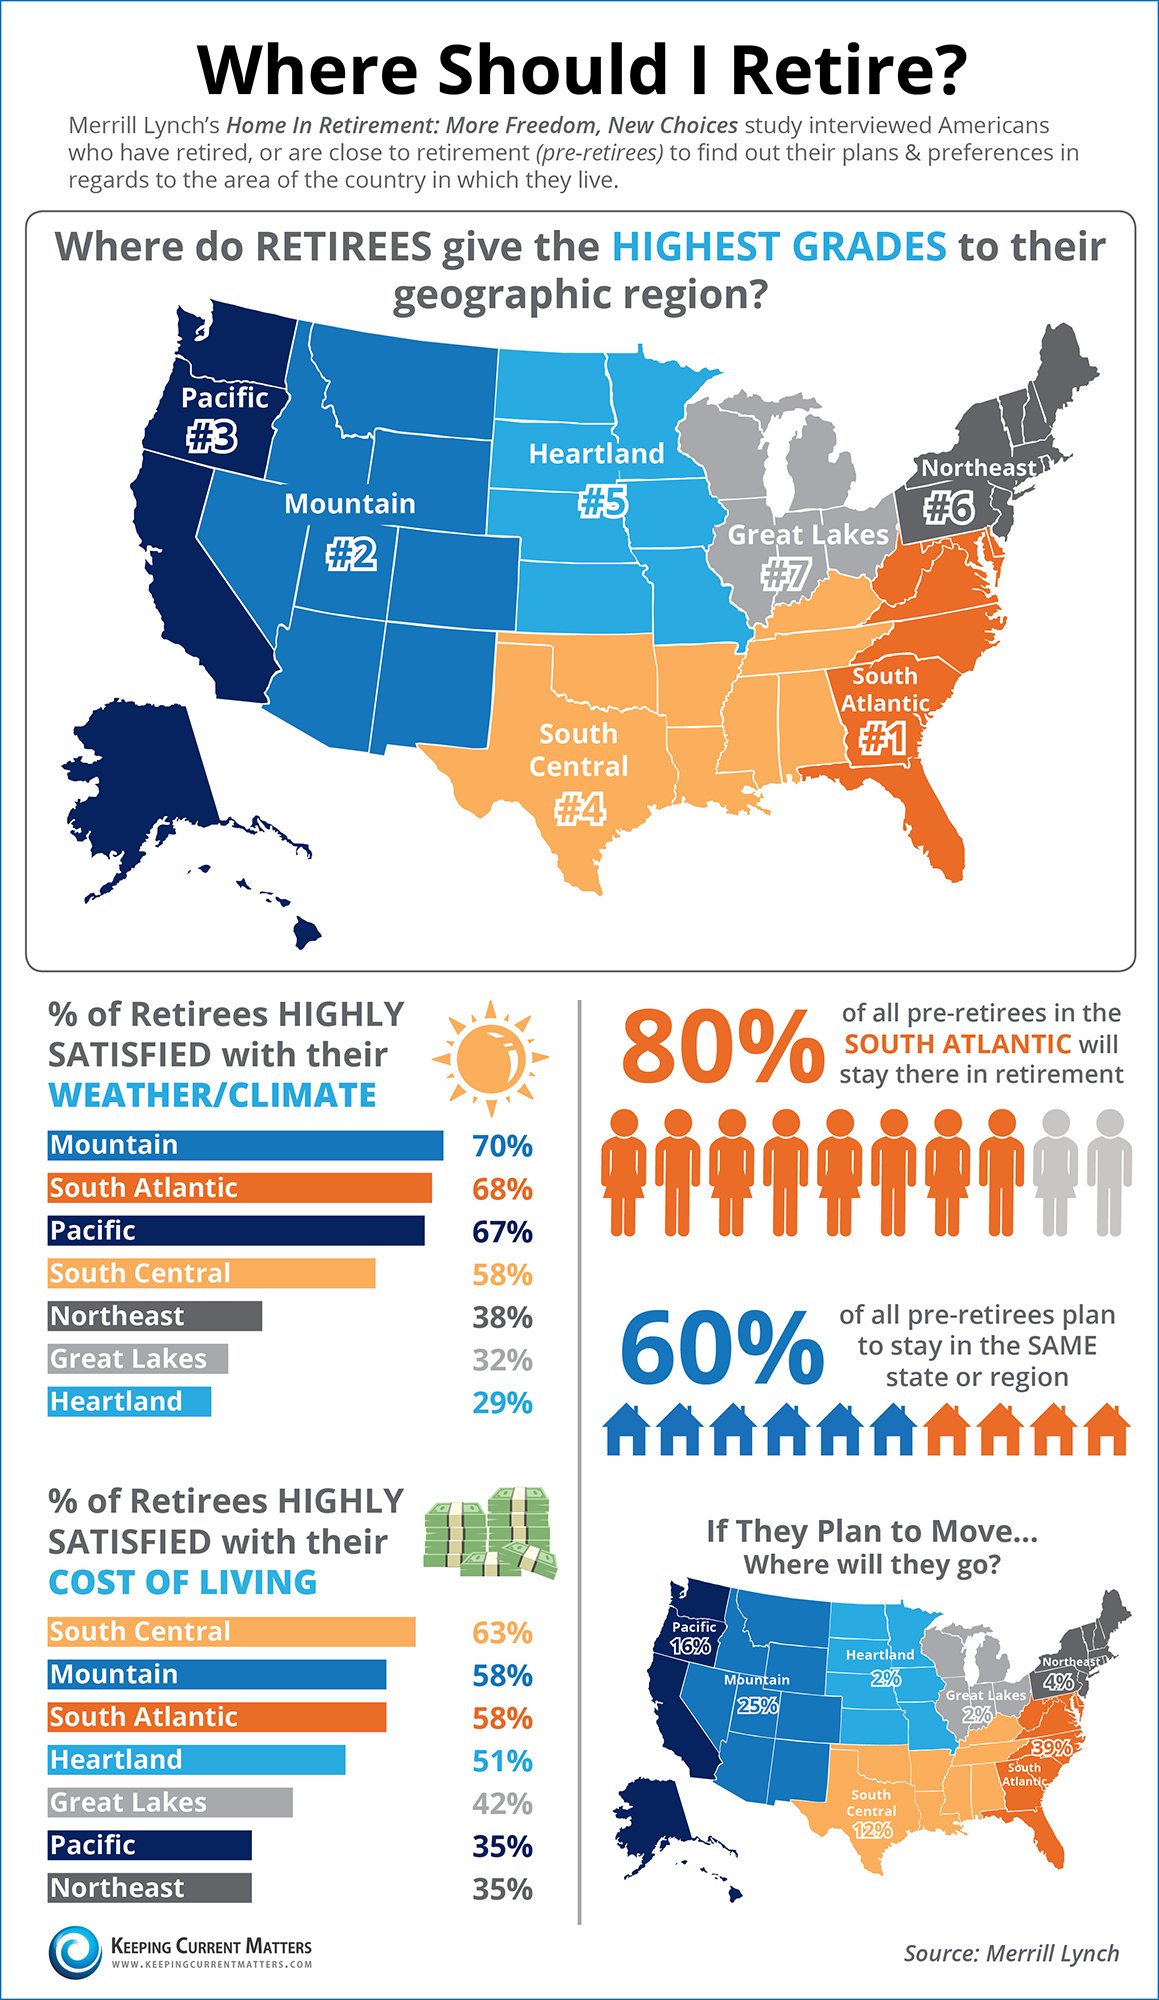 Where Should I Retire [INFOGRAPHIC] | Keeping Current Matters